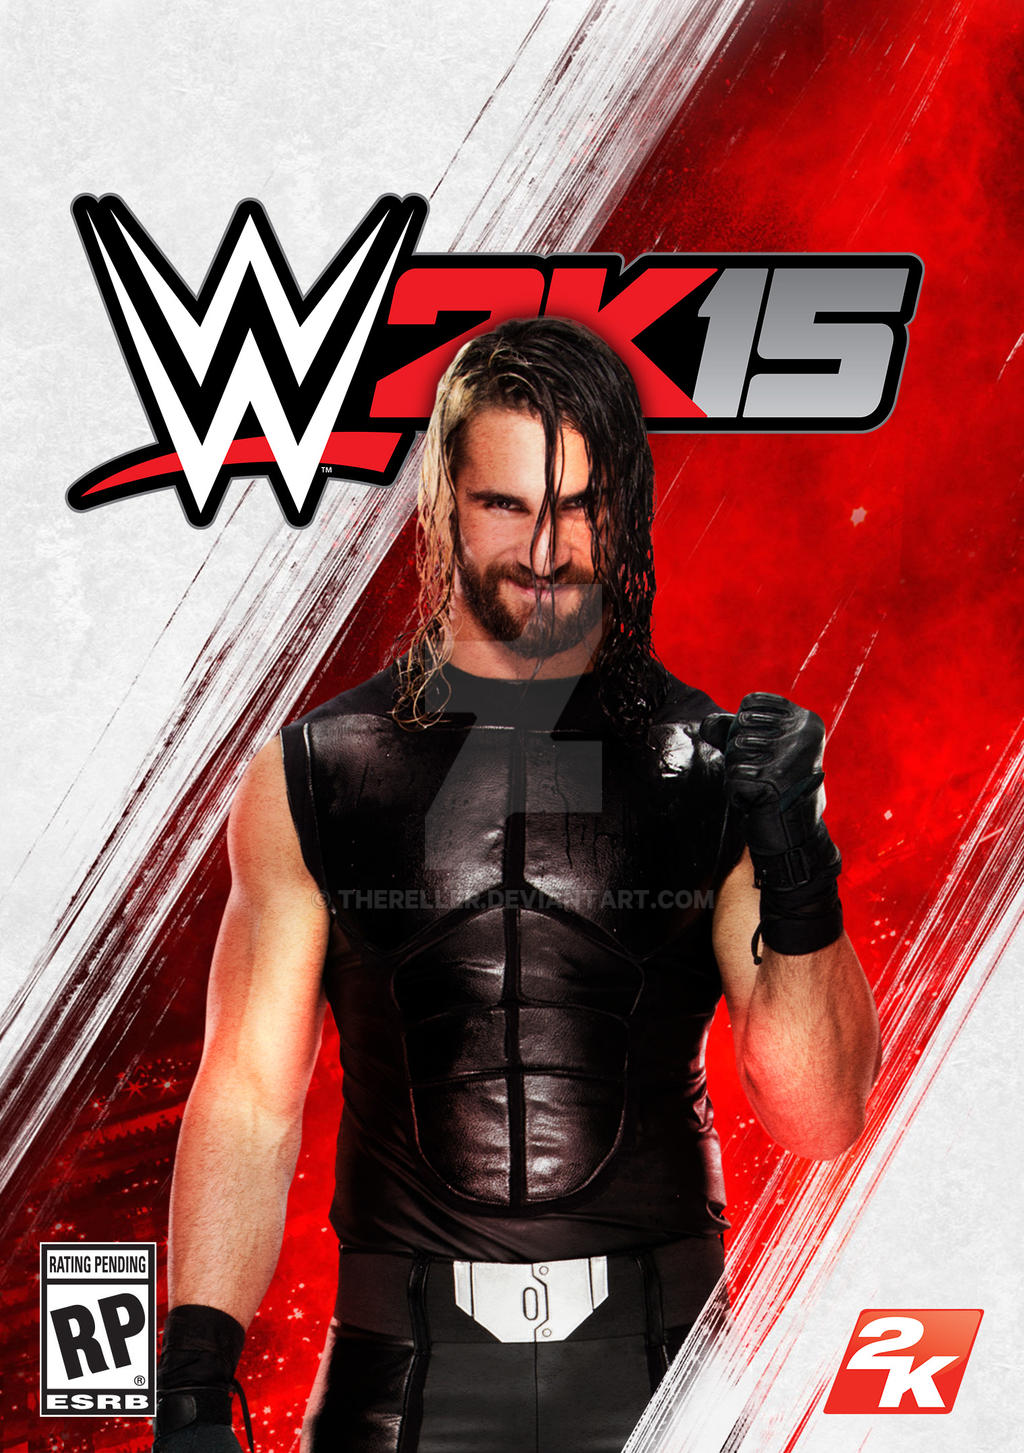 WWE 2K15 Cover Featuring Seth Rollins by TheReller on 